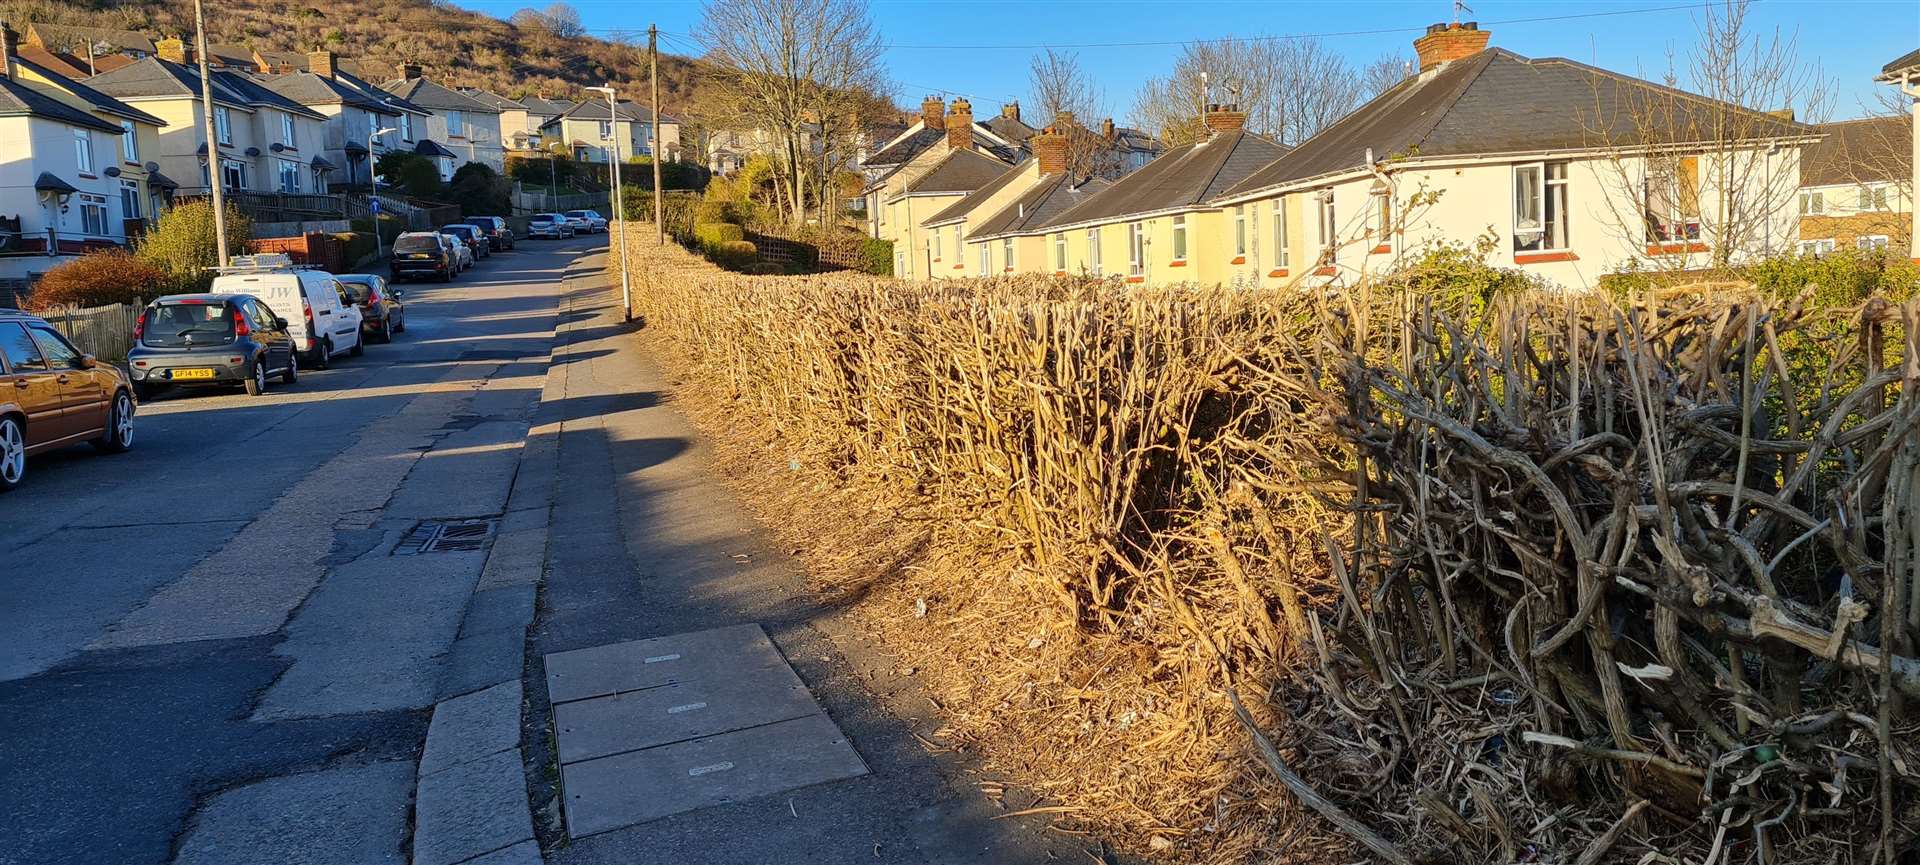 The hedge on February 27. Picture: Kevin Maynard